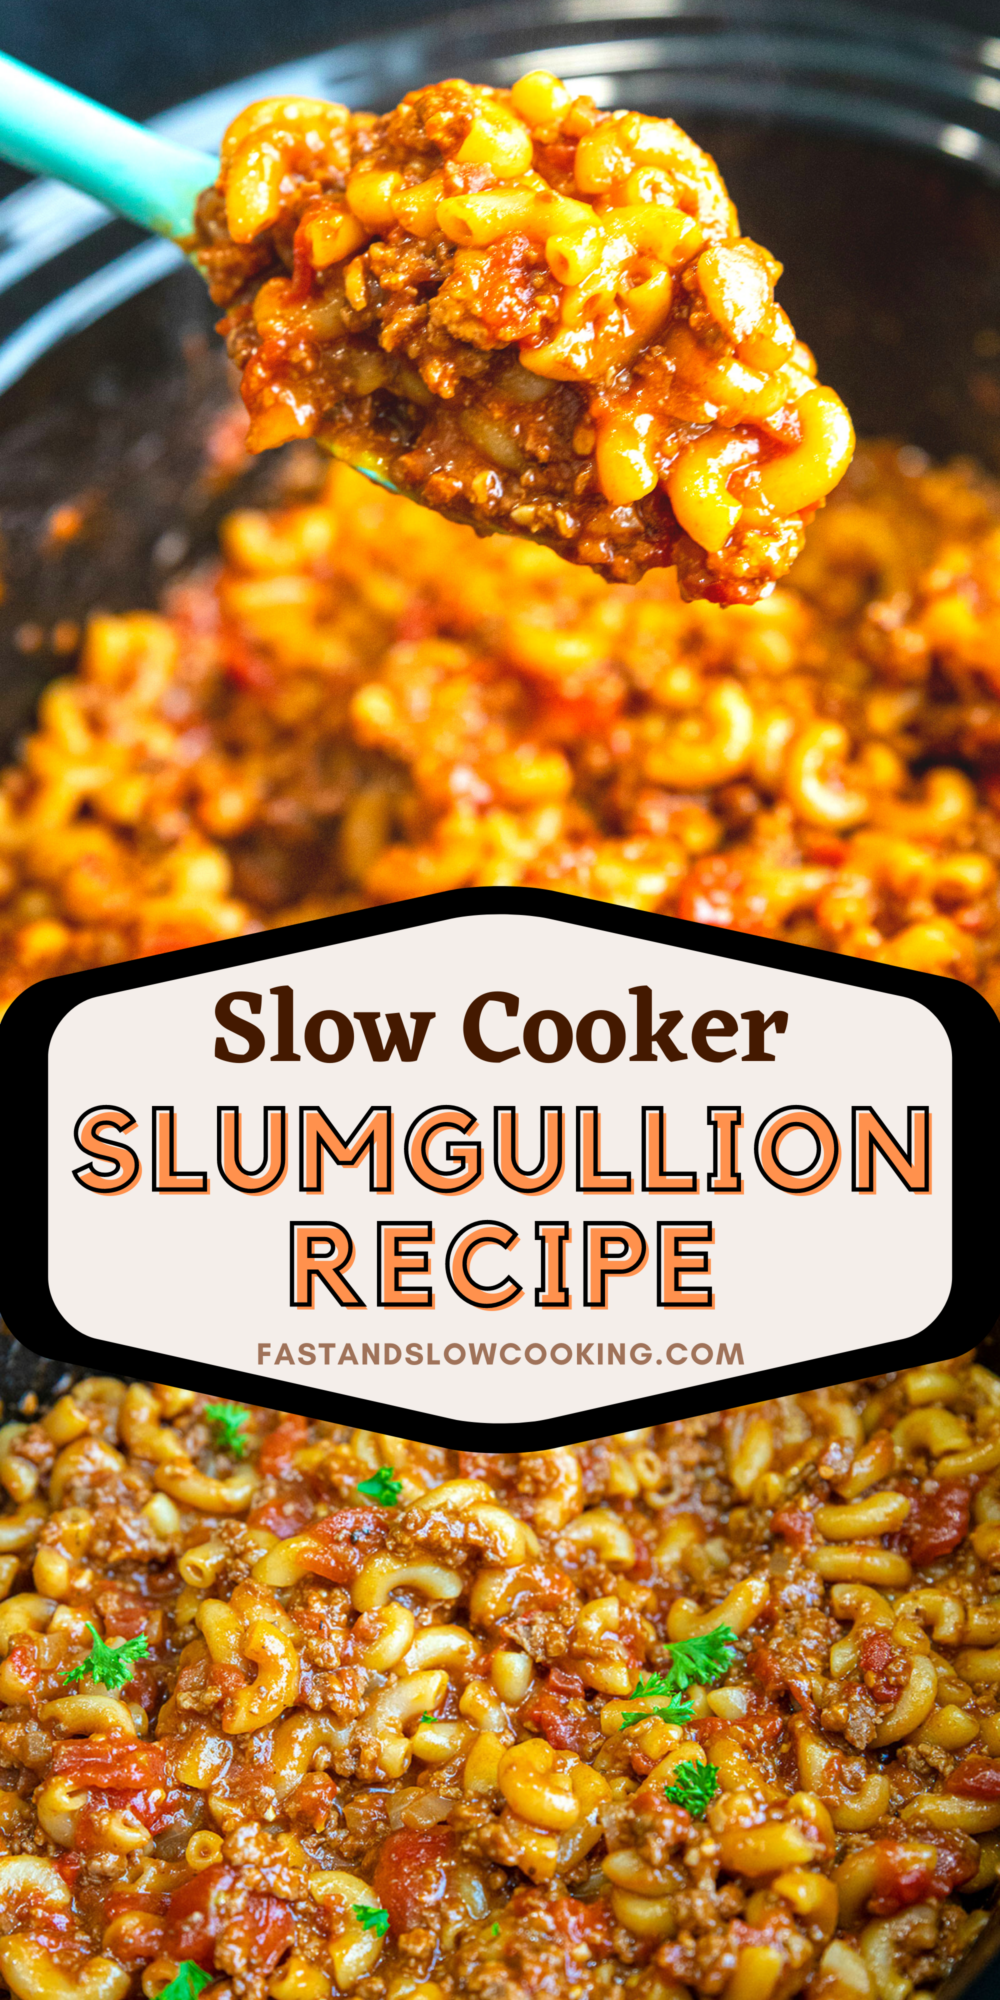 Slumgullion is delicious ground beef simmered in a tomato sauce all day, then elbow macaroni cooked up right in the slow cooker at the end! The perfect weekday dinner for busy families!